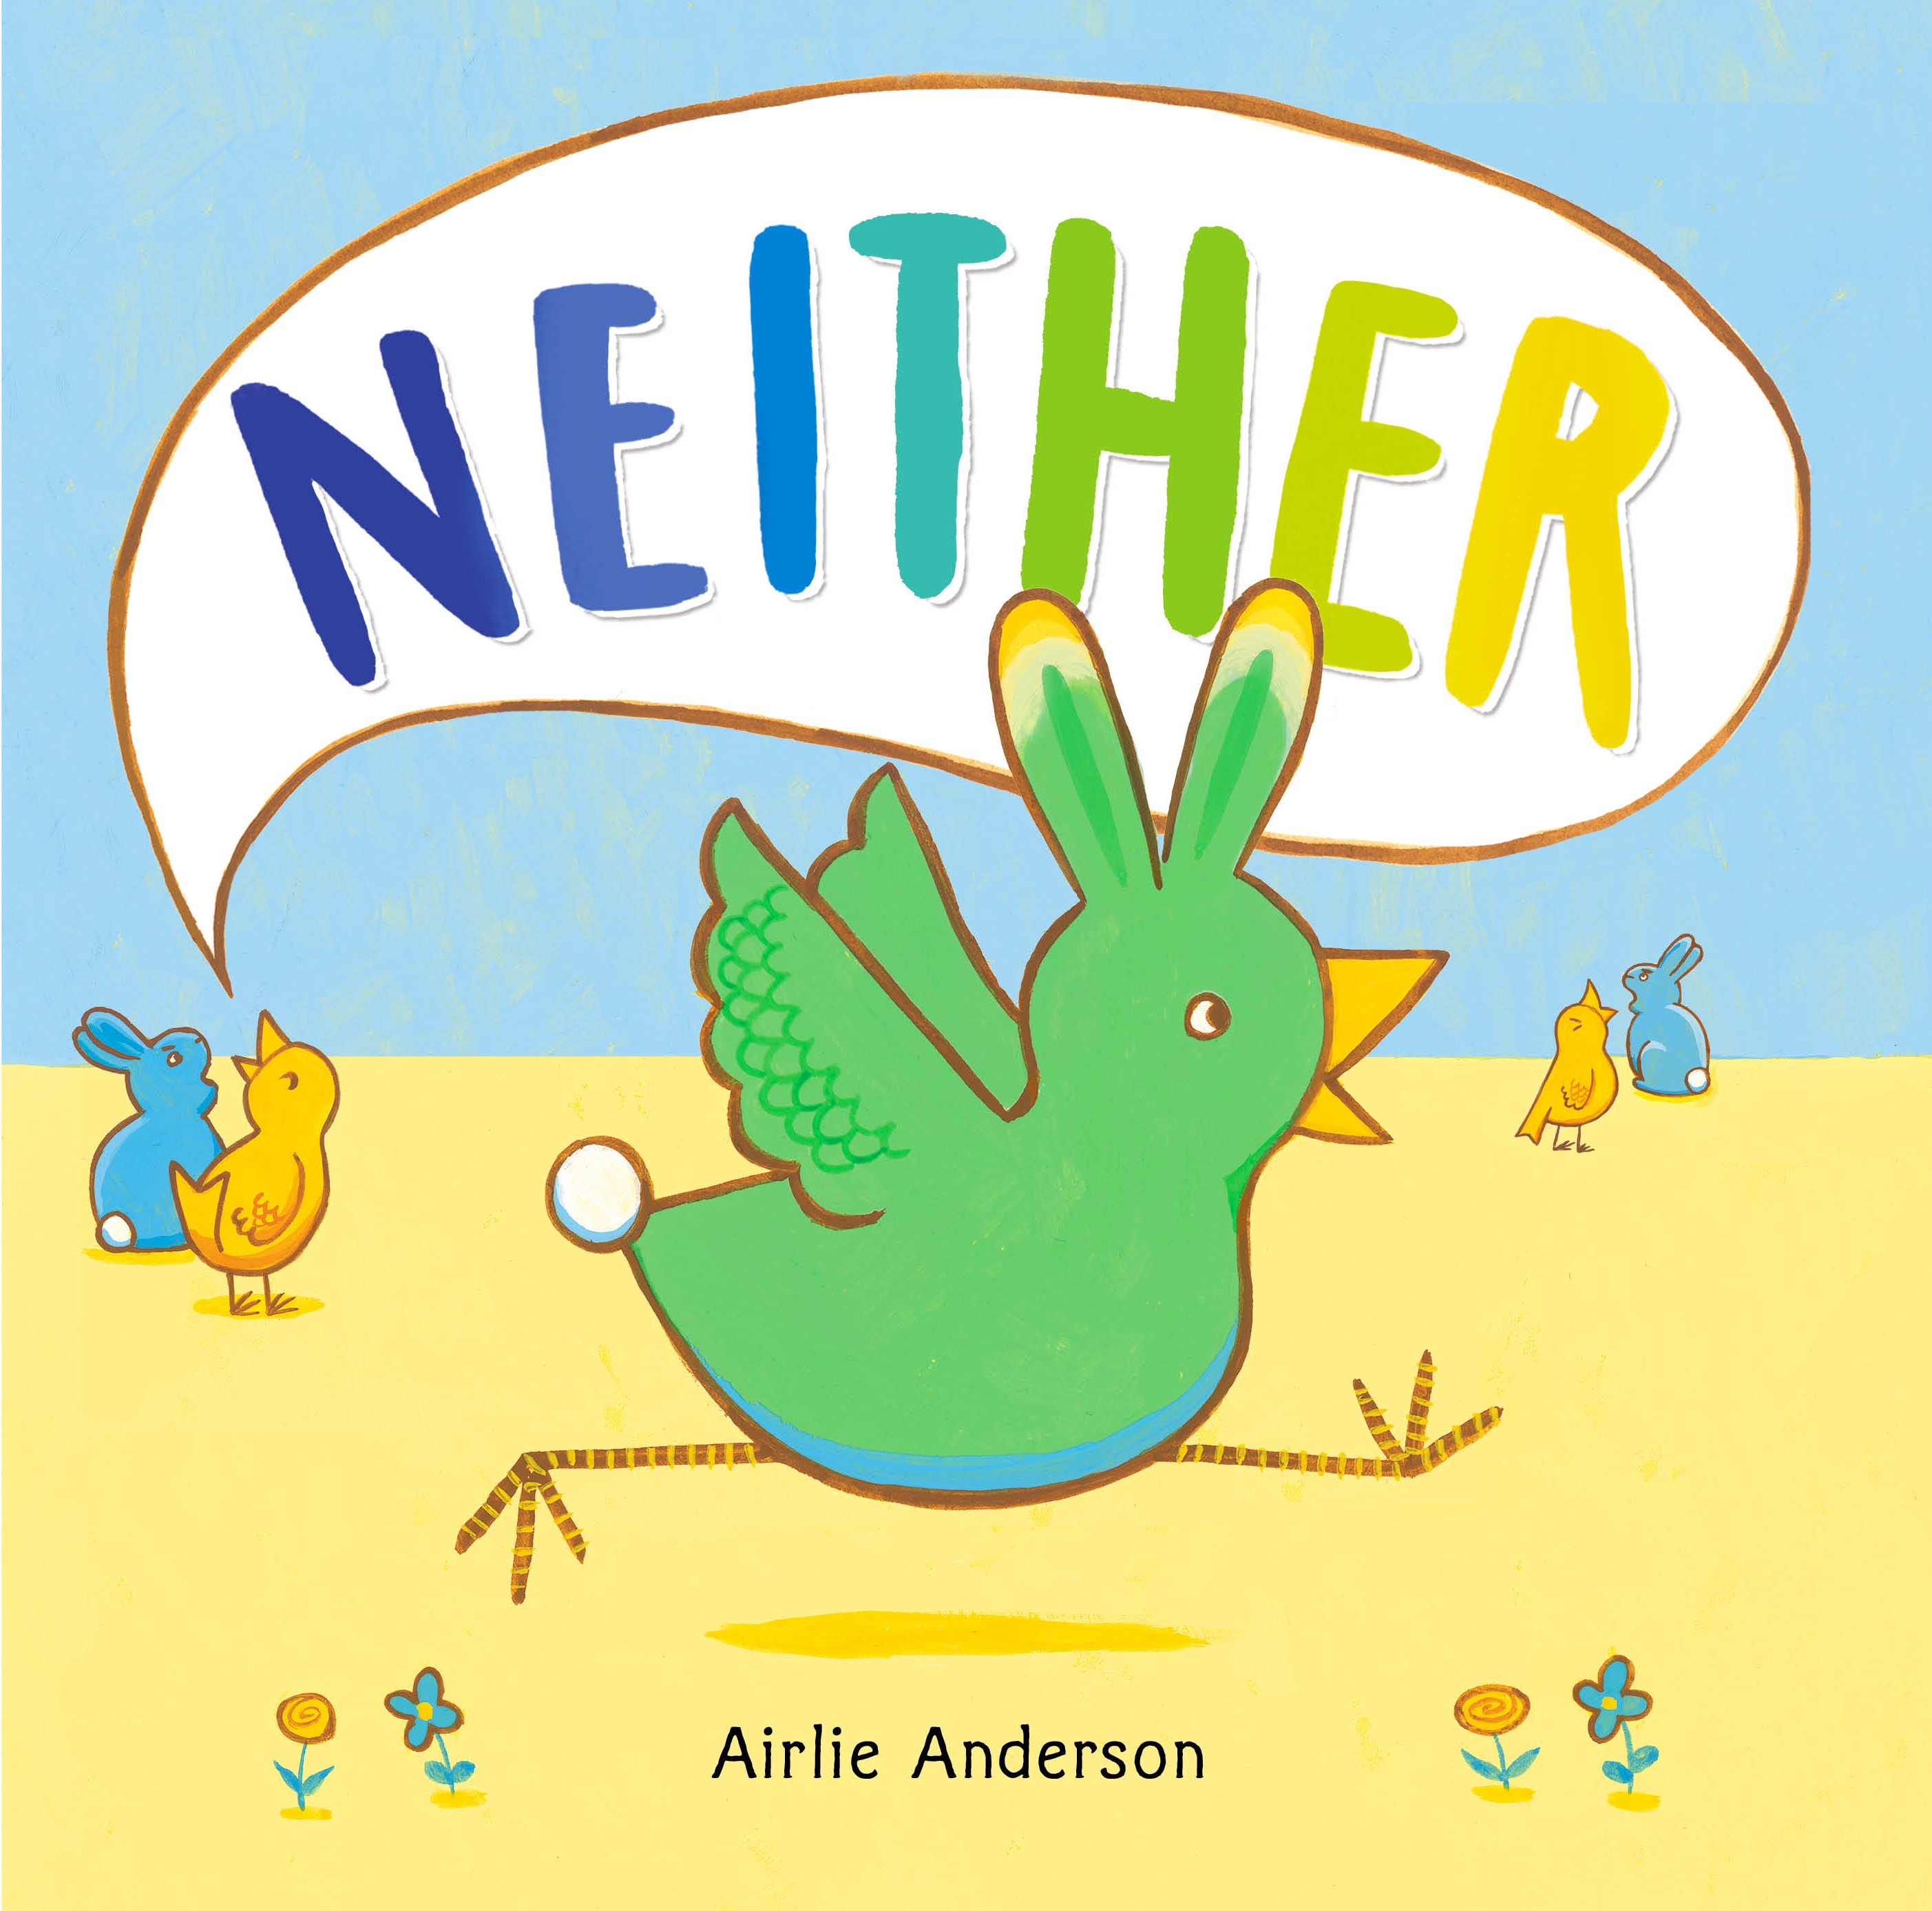 Sunday Story Time with Airlie Anderson (Author & Illustrator of NEITHER)